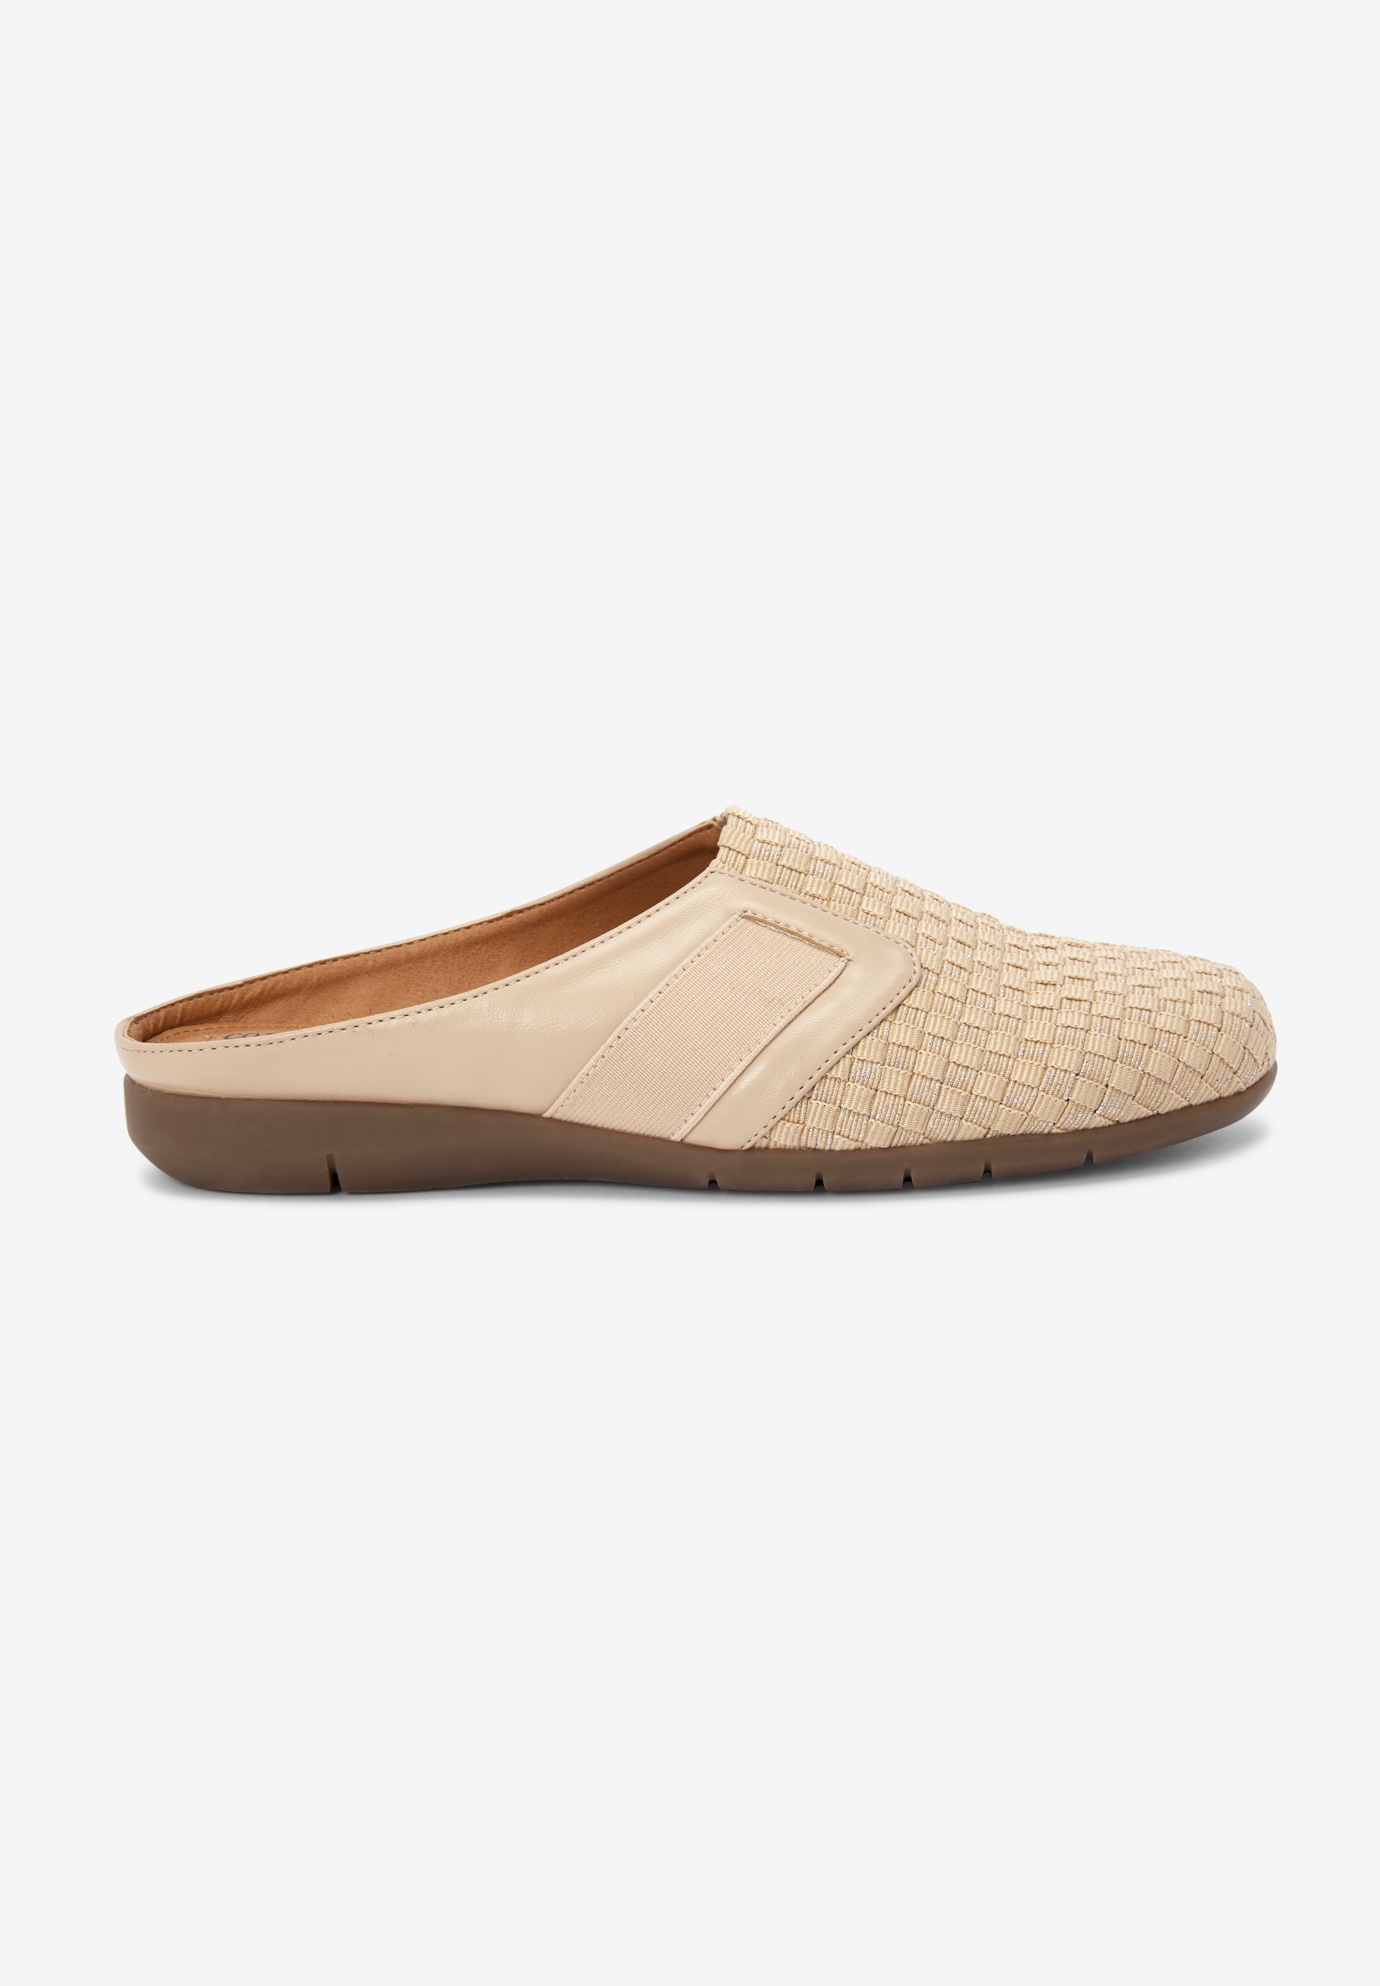 Comfortview Women's Wide Width The Lola Mule Shoes - image 5 of 7